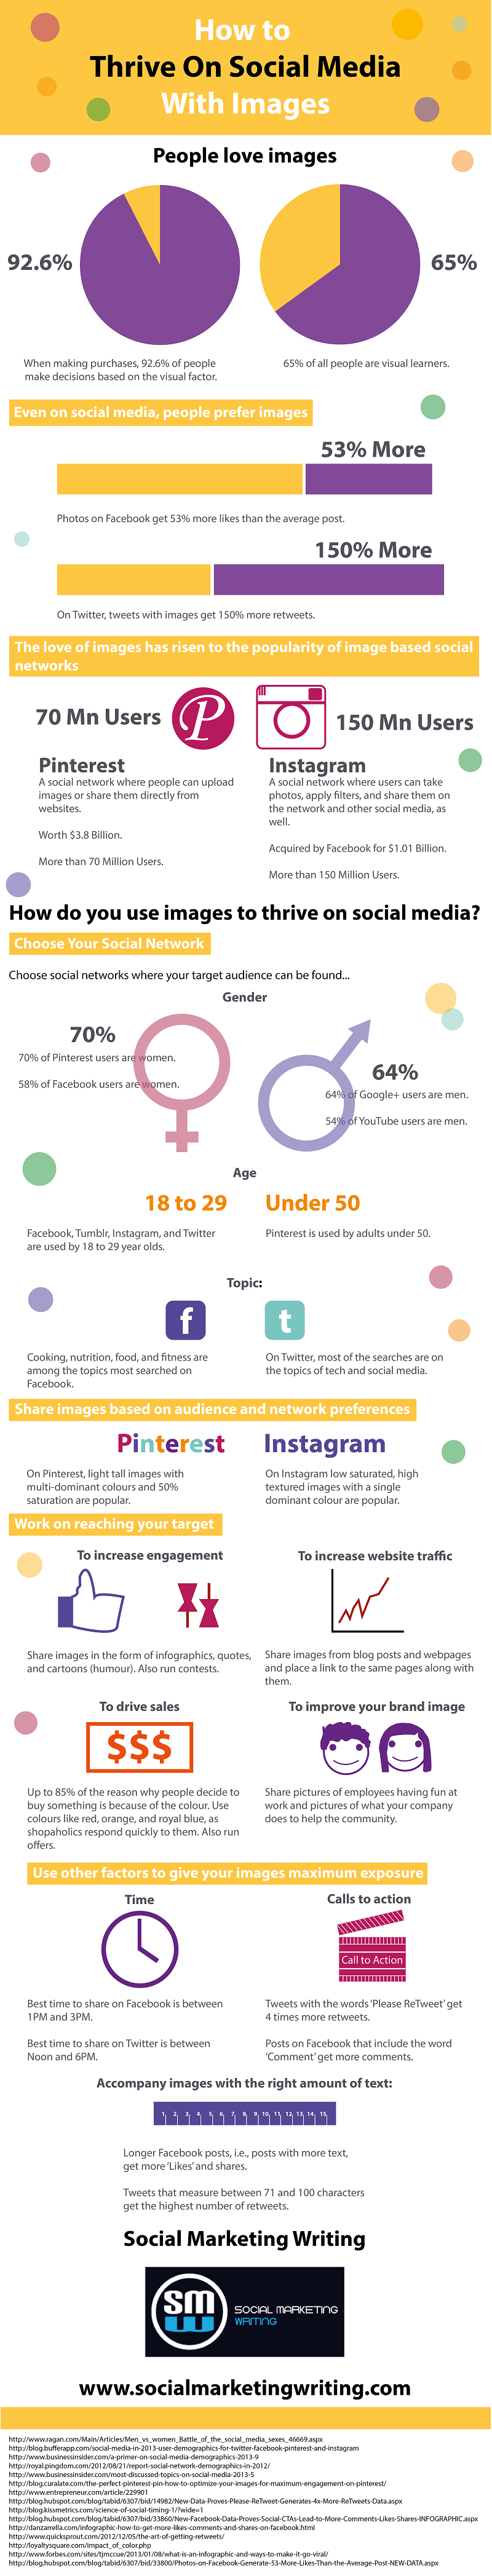 Final Infographic How to Thrive on Social Media With Images